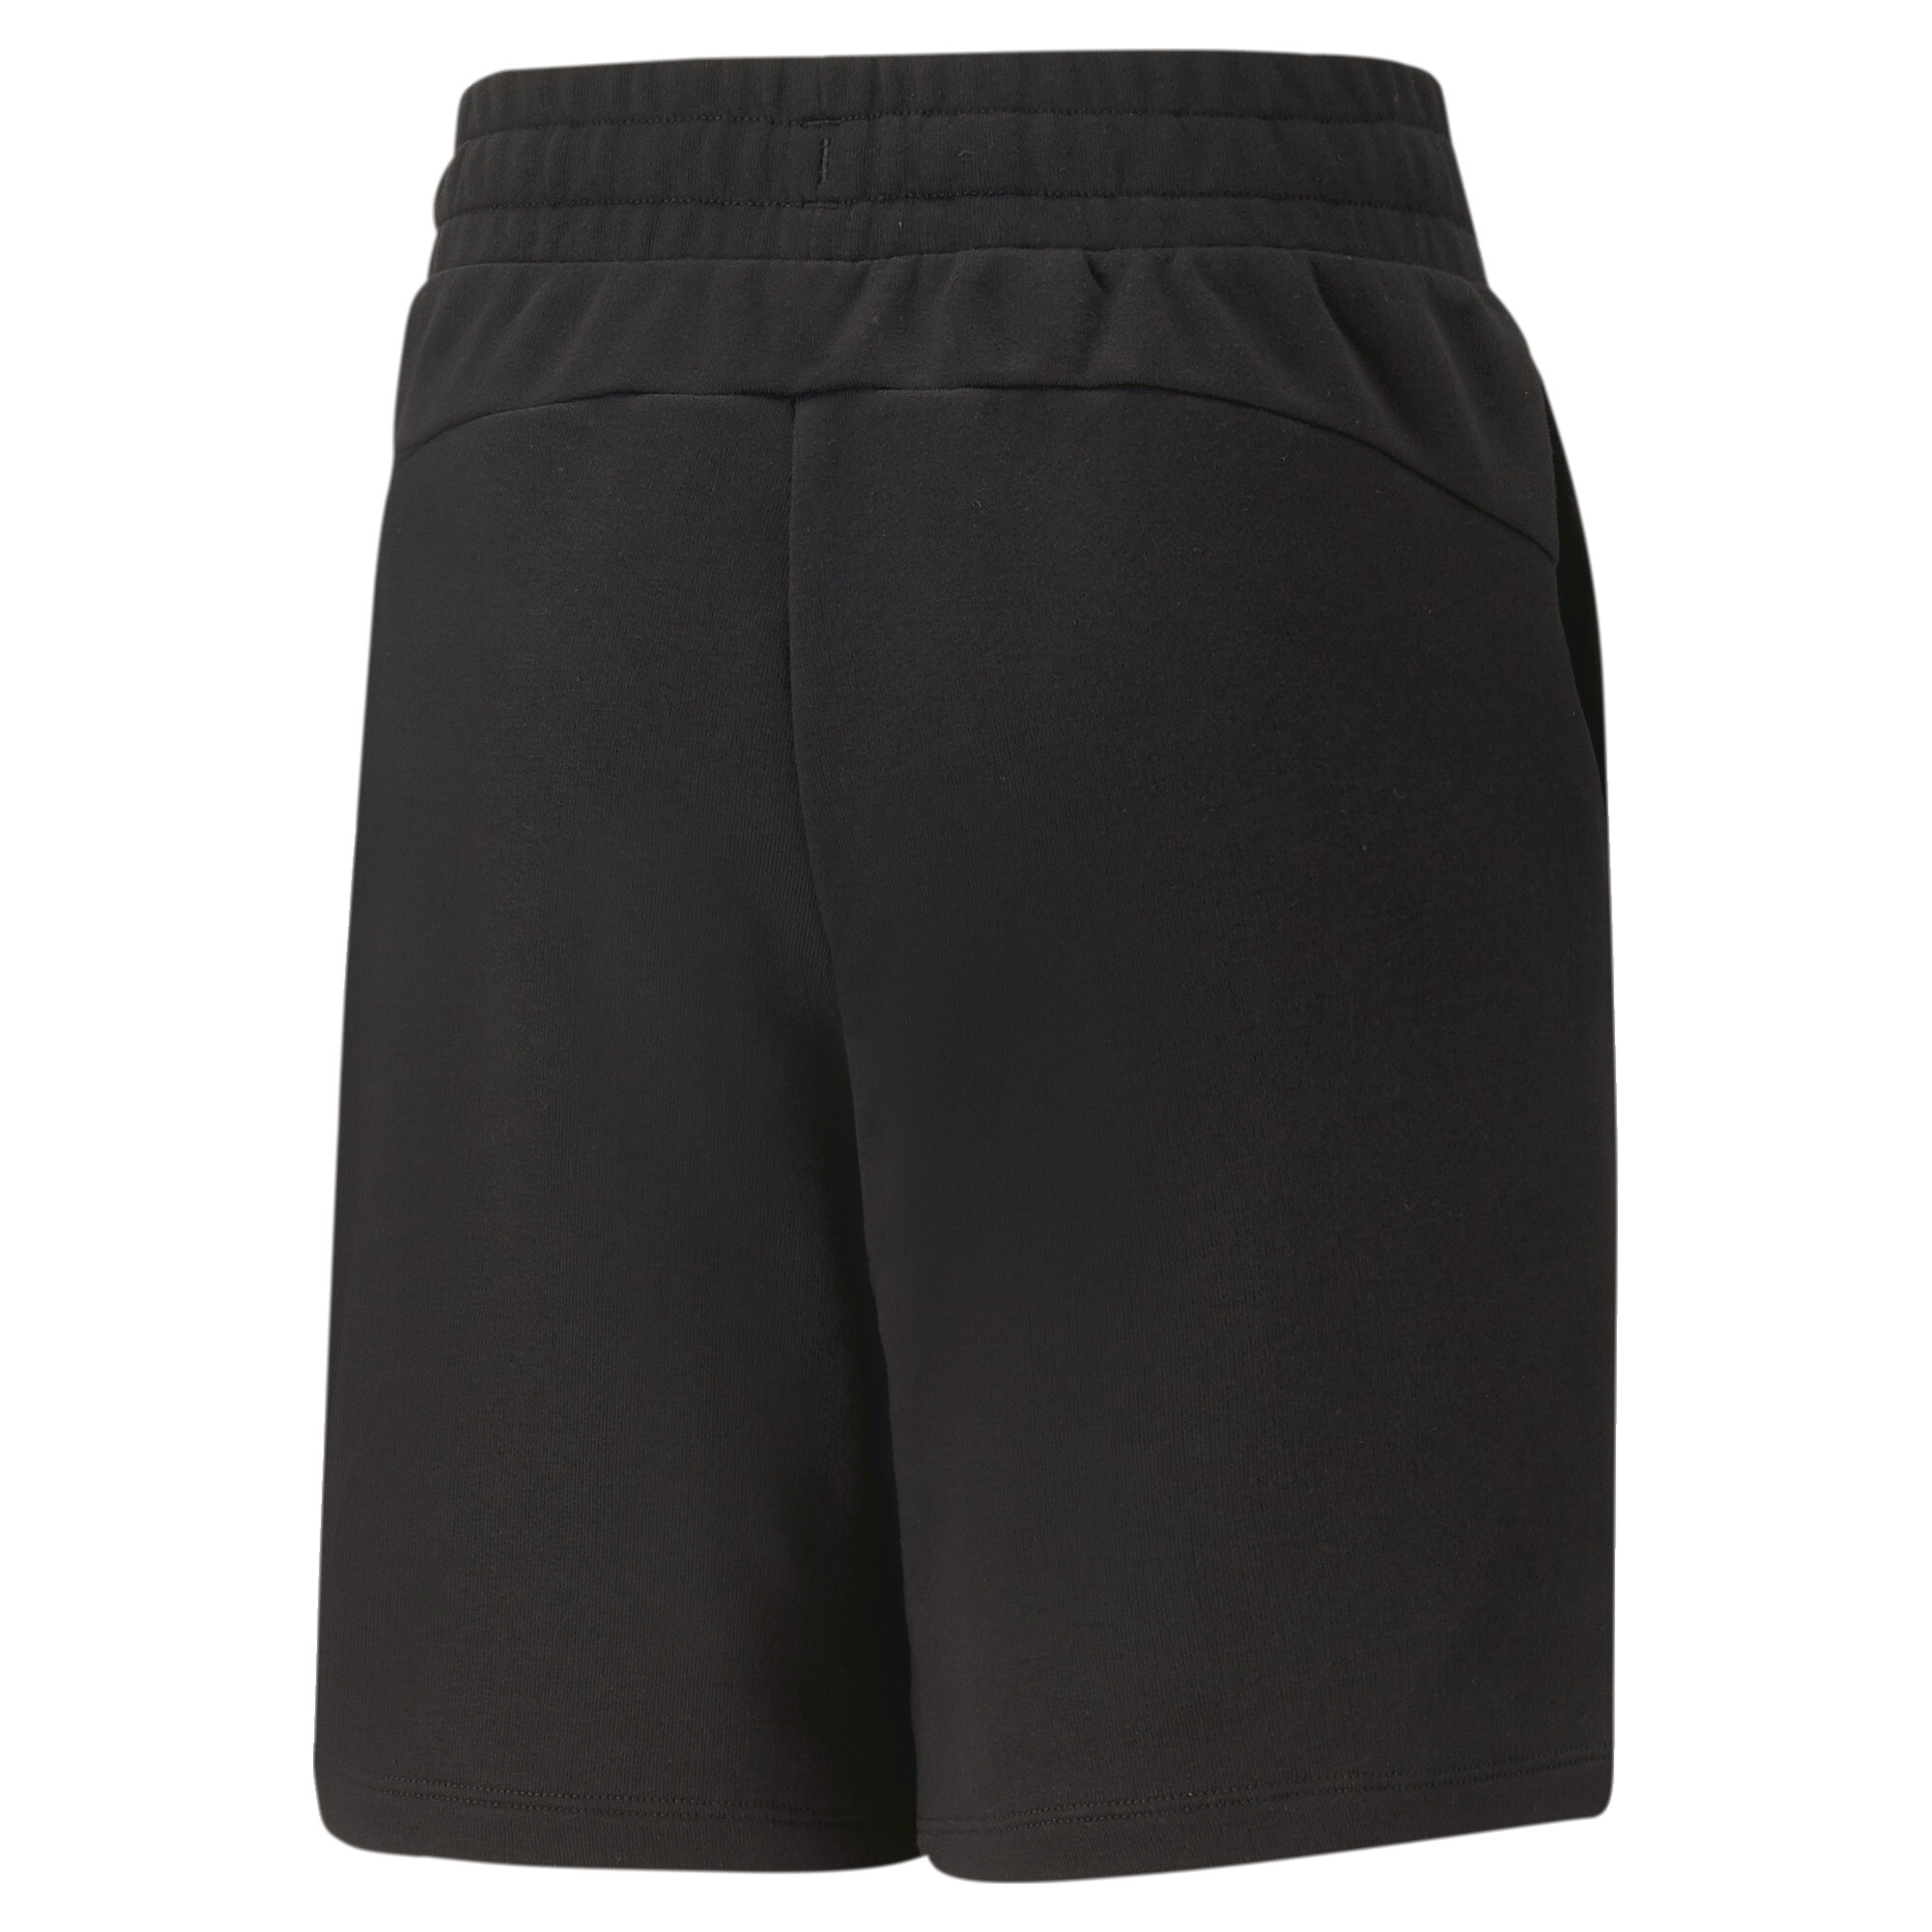 PUMA X MIRACULOUS Shorts In Black, Size 11-12 Youth